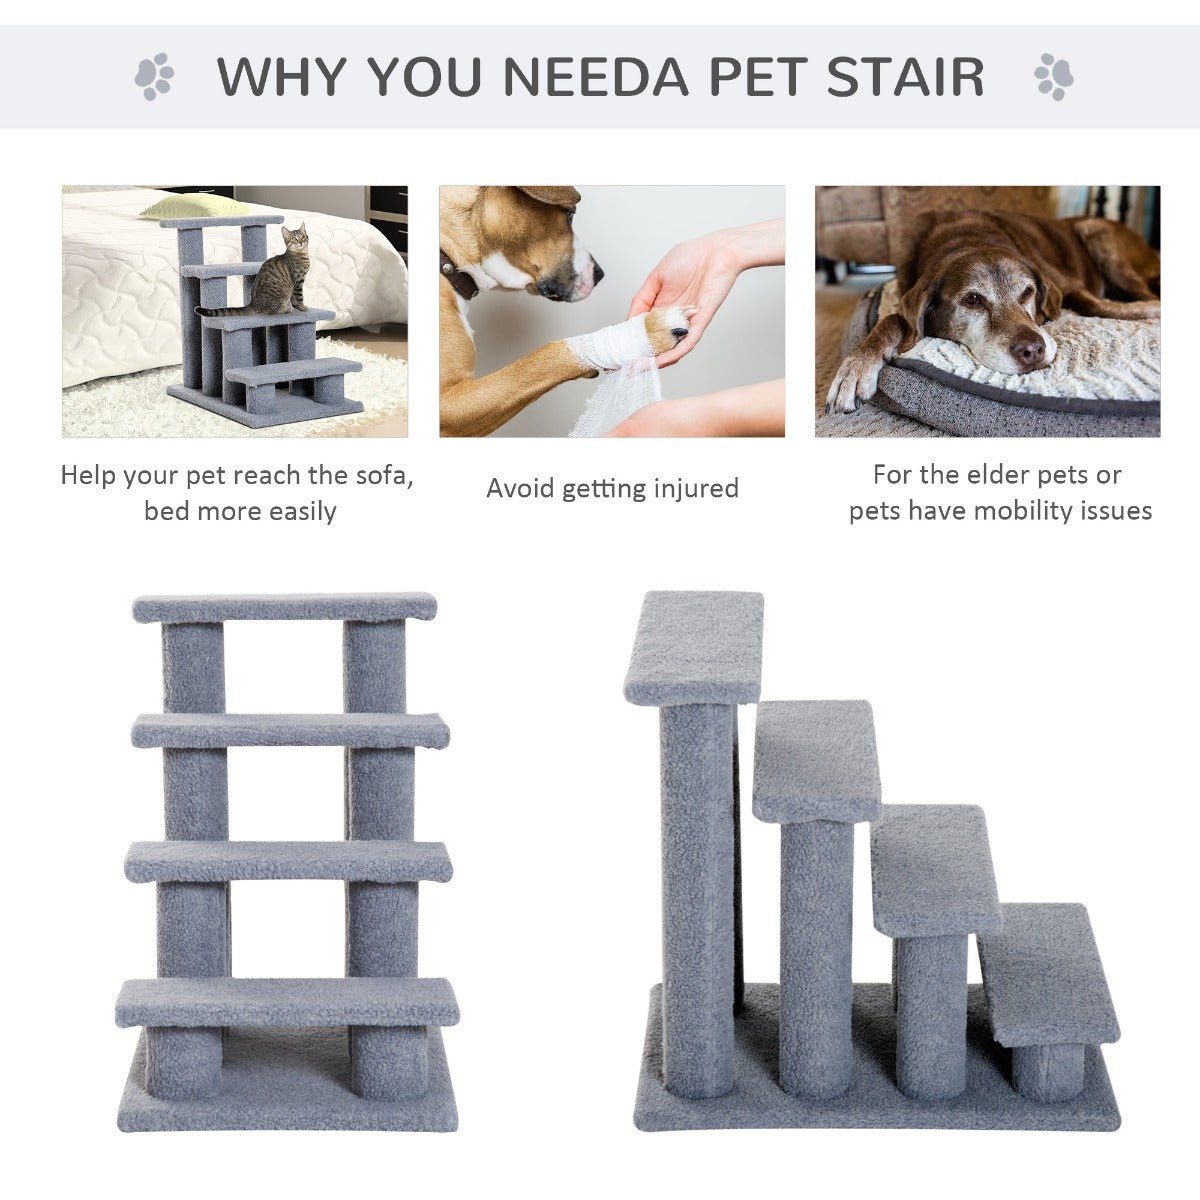 -Pawhut 25" 4-Step Multi-Level Carpeted Cat Scratching Post Pet Stairs for High Beds & Sofas, Cat Furniture With Toy, Gray - Outdoor Style Company